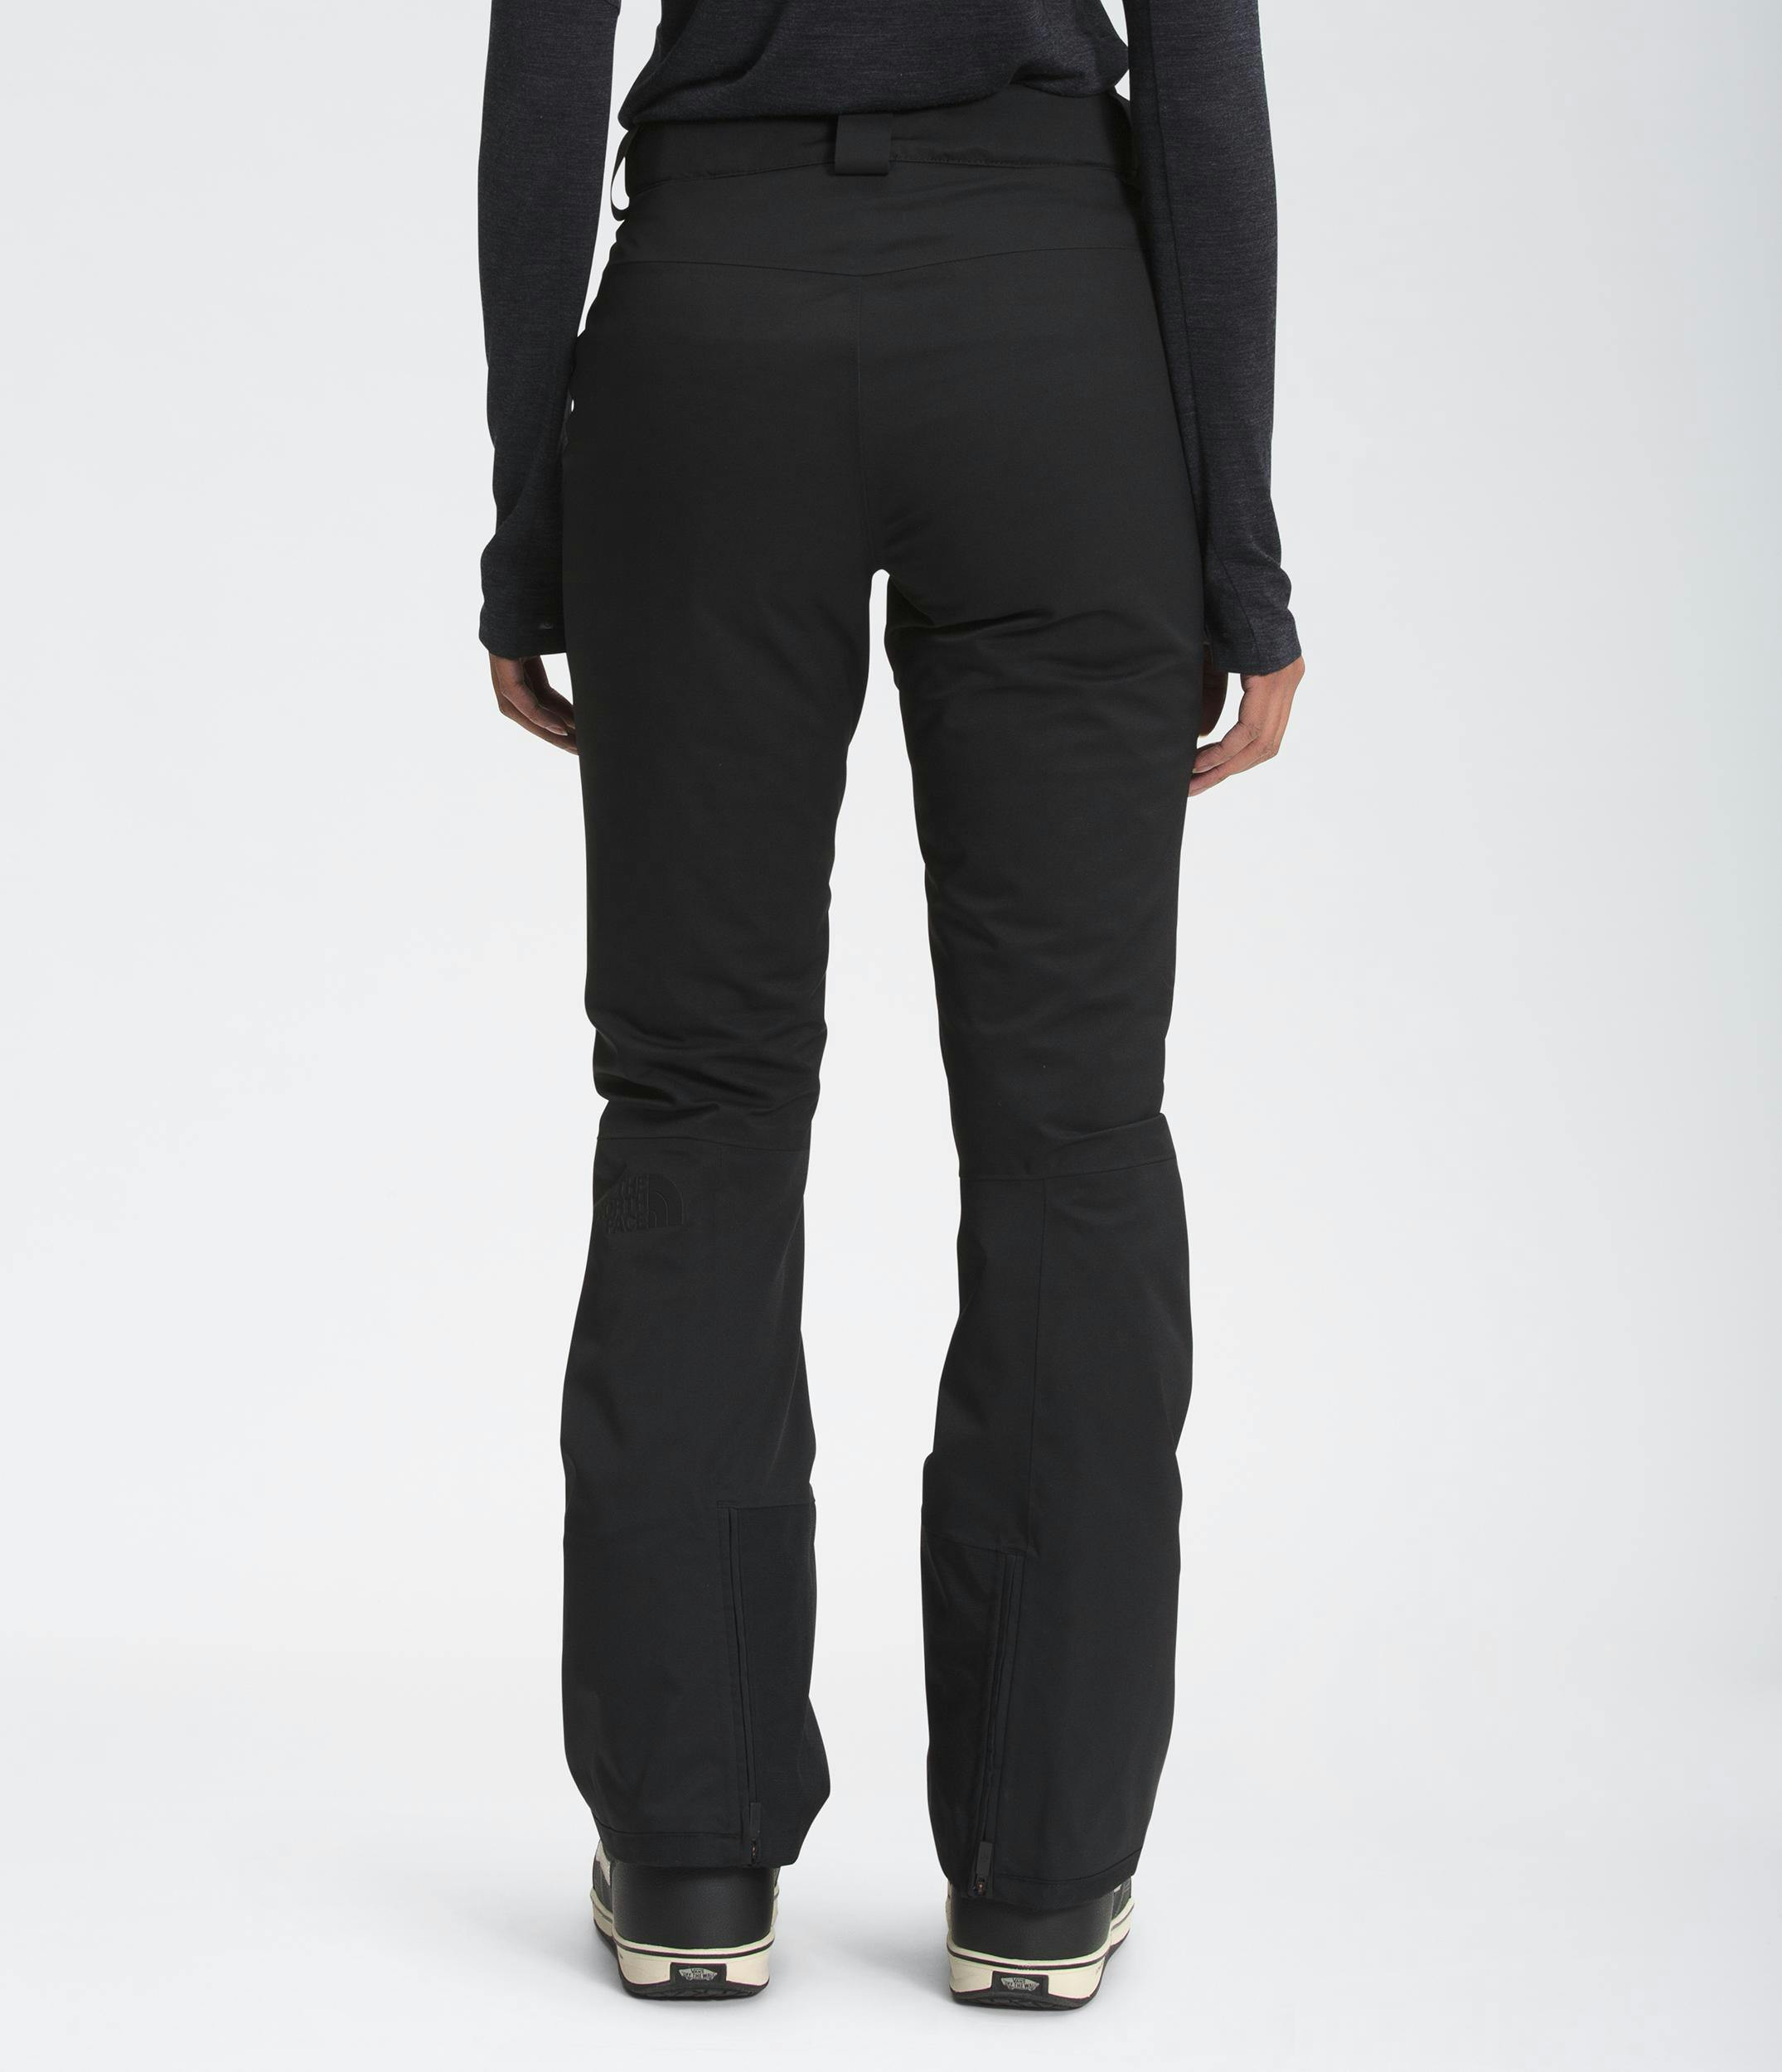 The North Face Women's Lenado Insulated Pants